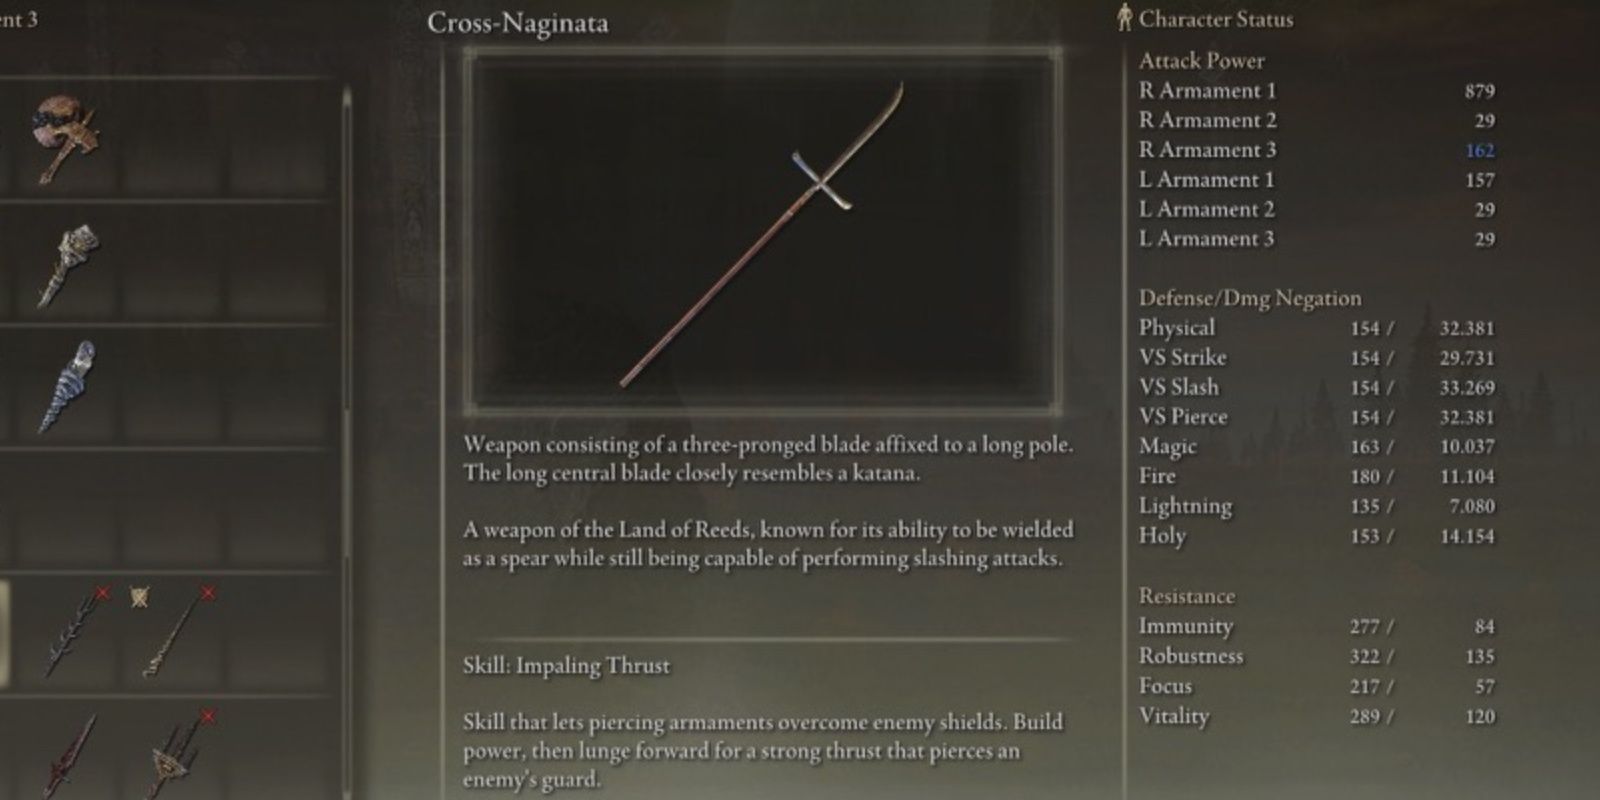 The Cross-Naginata's item description and stats in the inventory in Elden Ring.